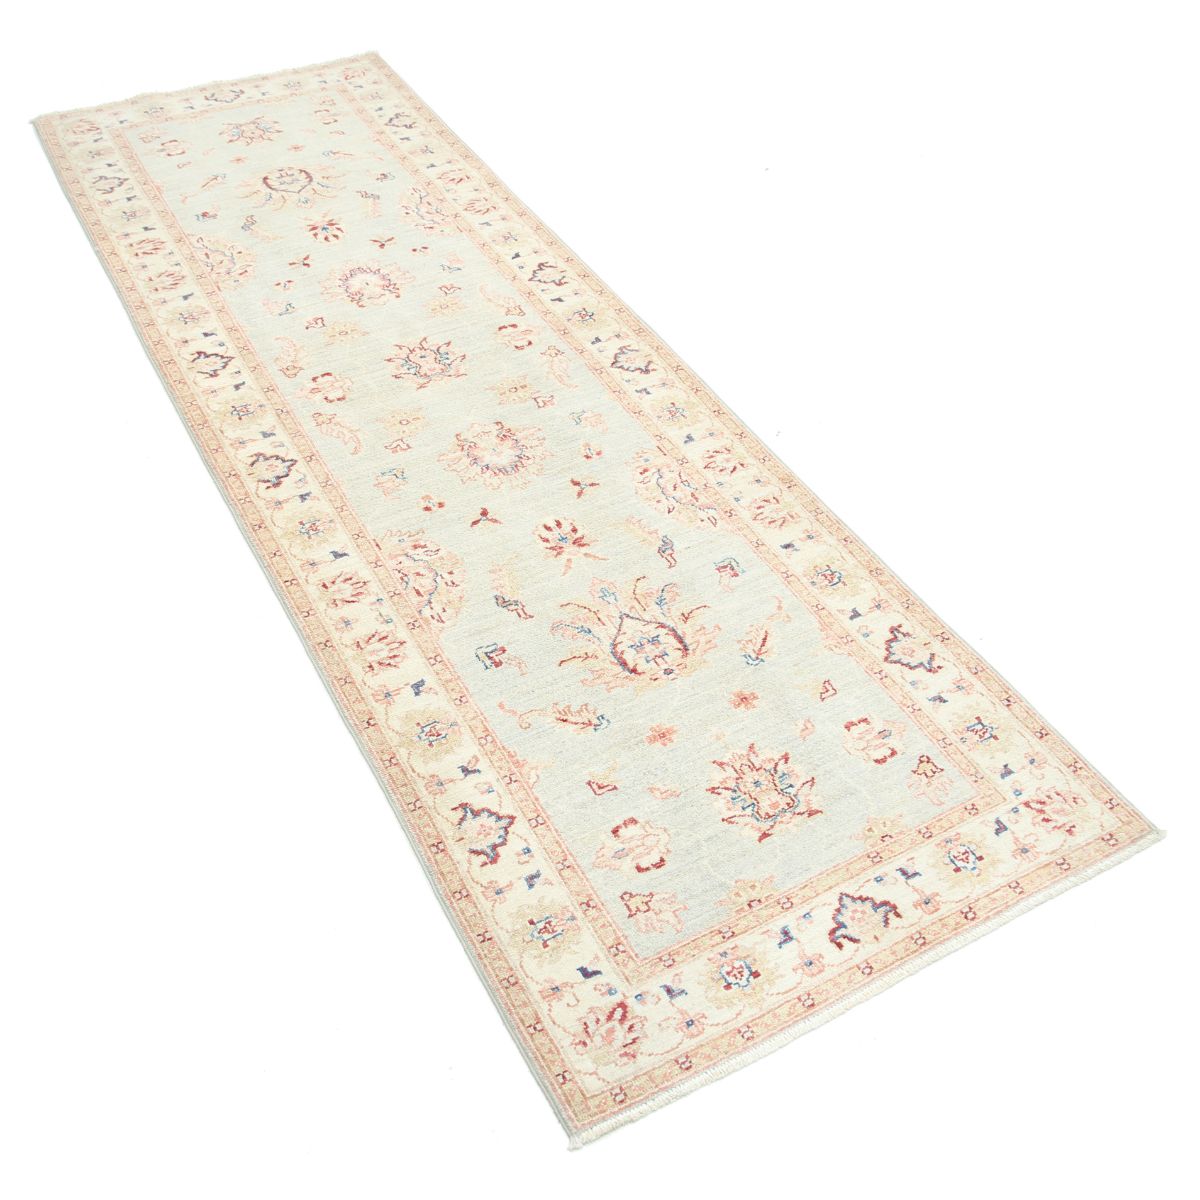 Serenity 2'8" X 8'1" Wool Hand-Knotted Rug